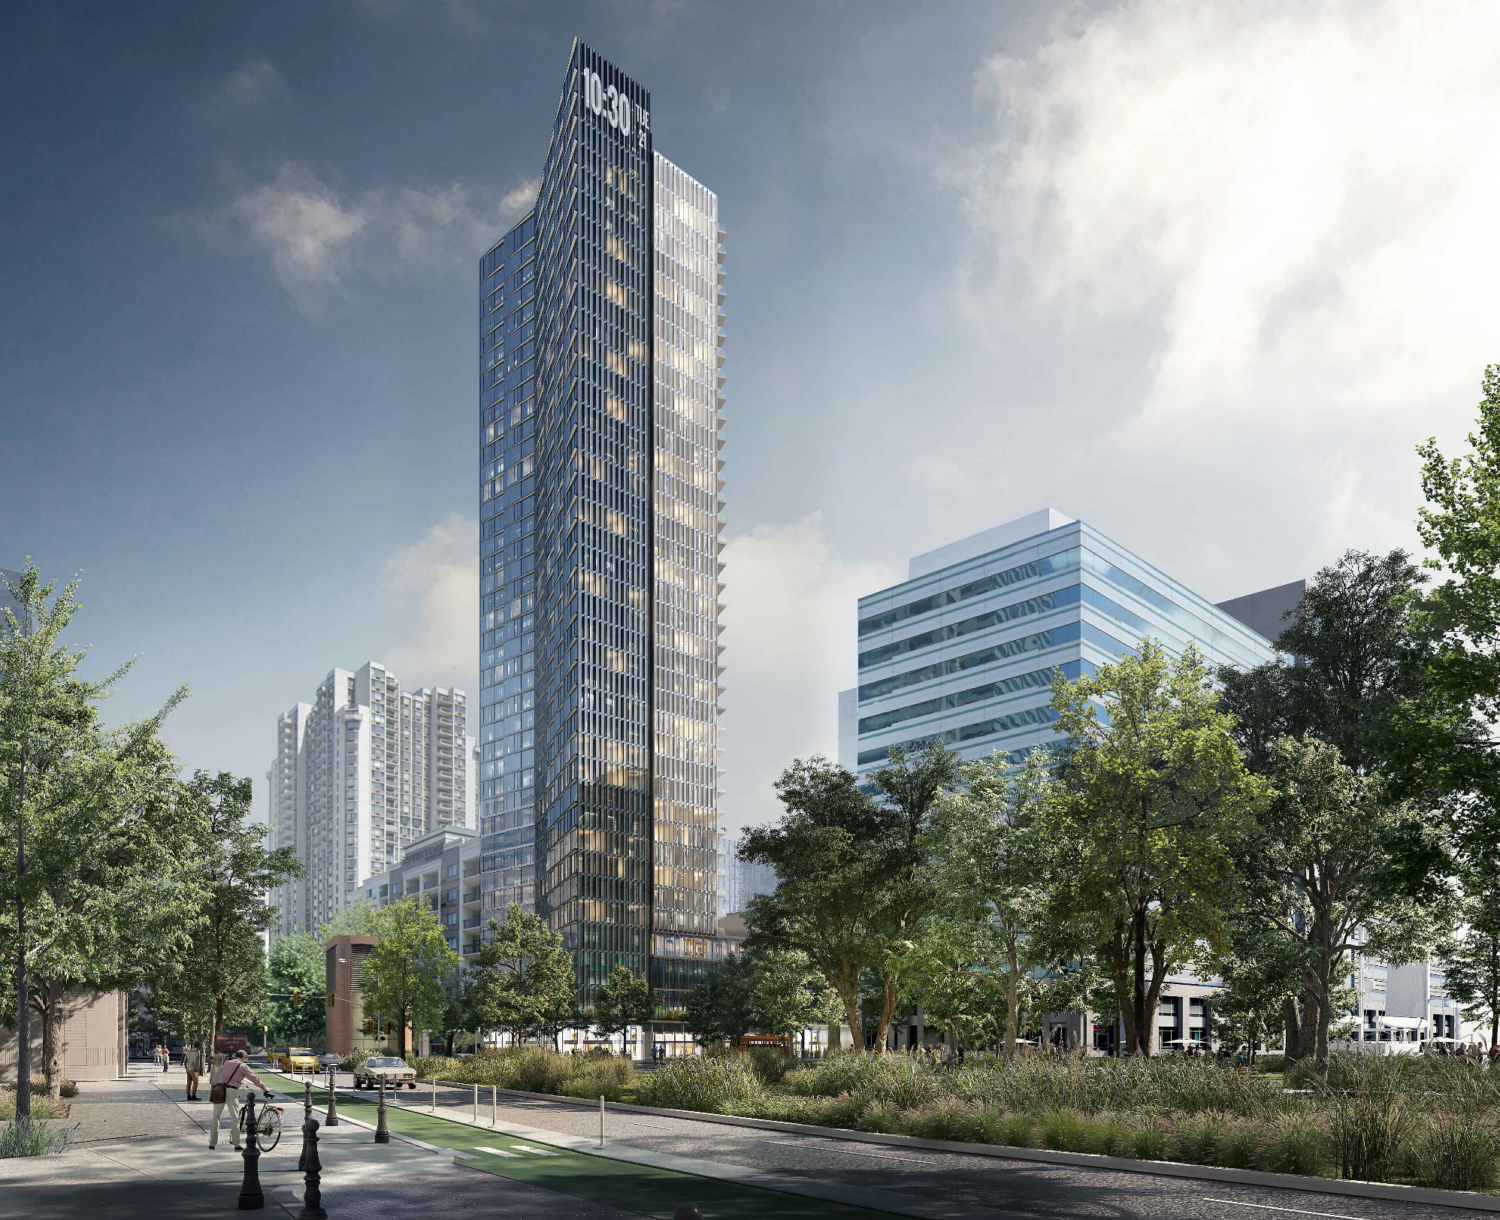 Render of 110 Town Square Place, via The City of Jersey City